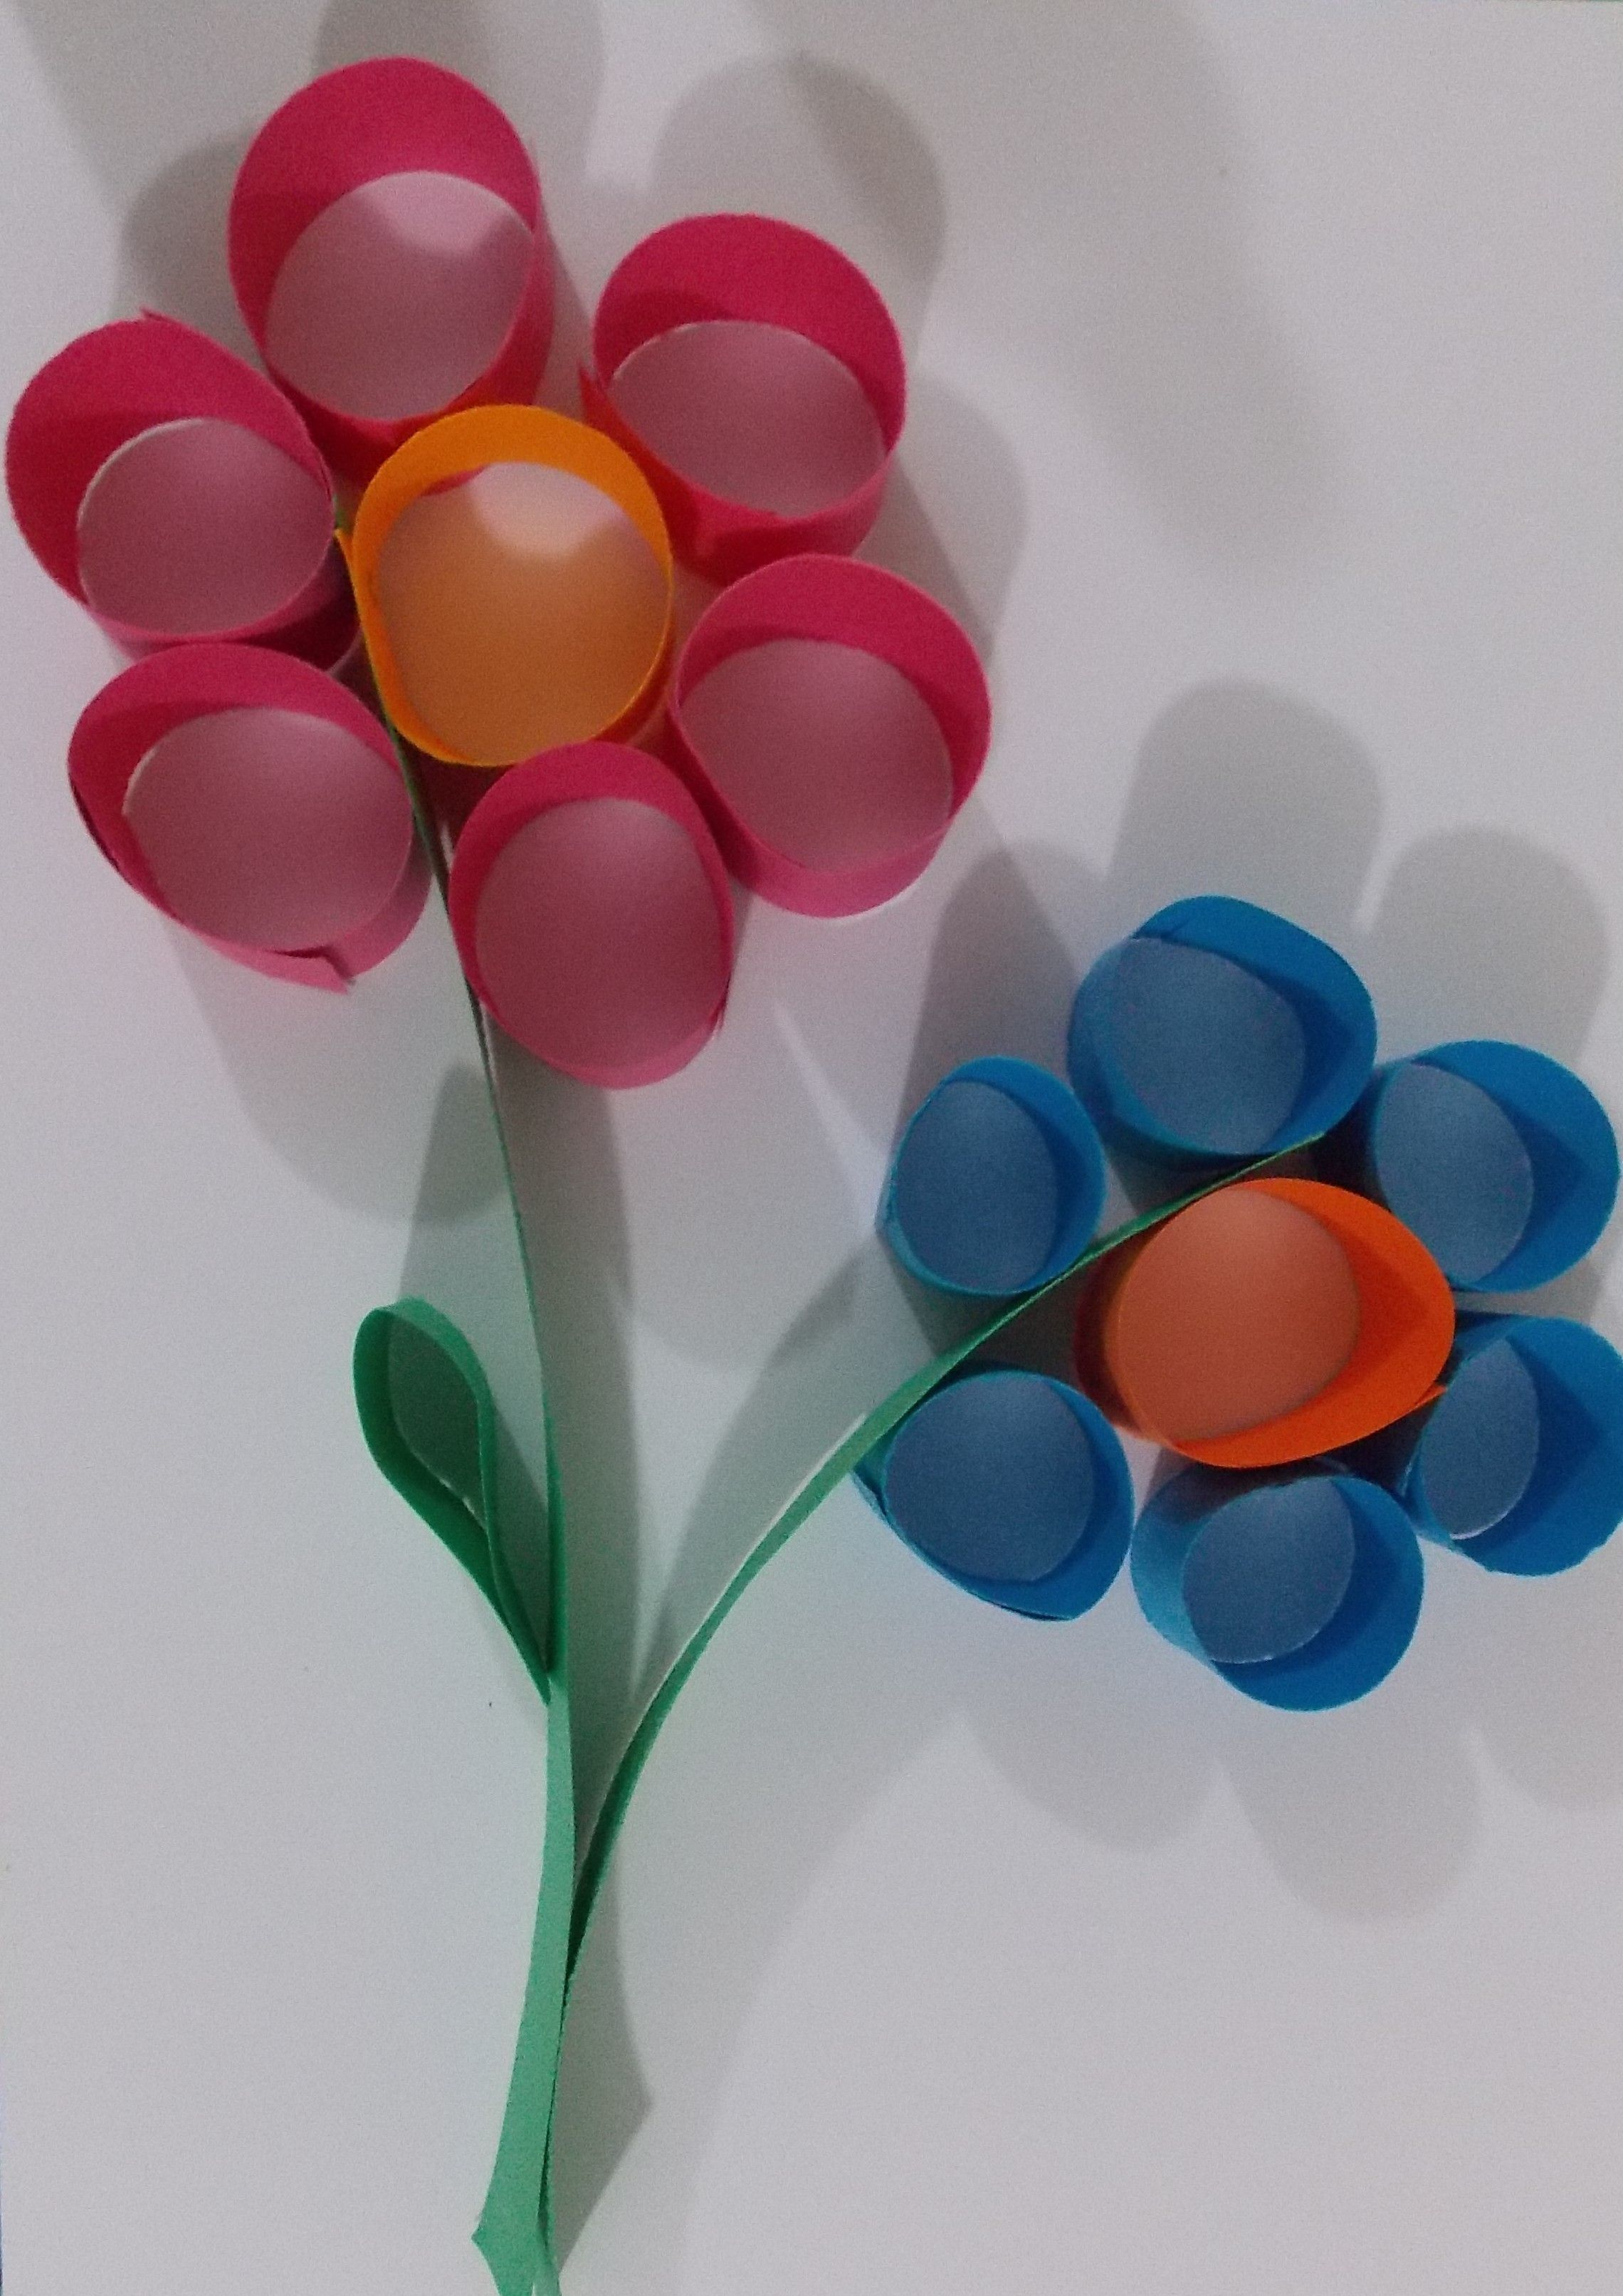 10 Stunning Arts And Crafts Ideas With Construction Paper 54 inspirational flower art and craft ideas decoration pinterest 2024